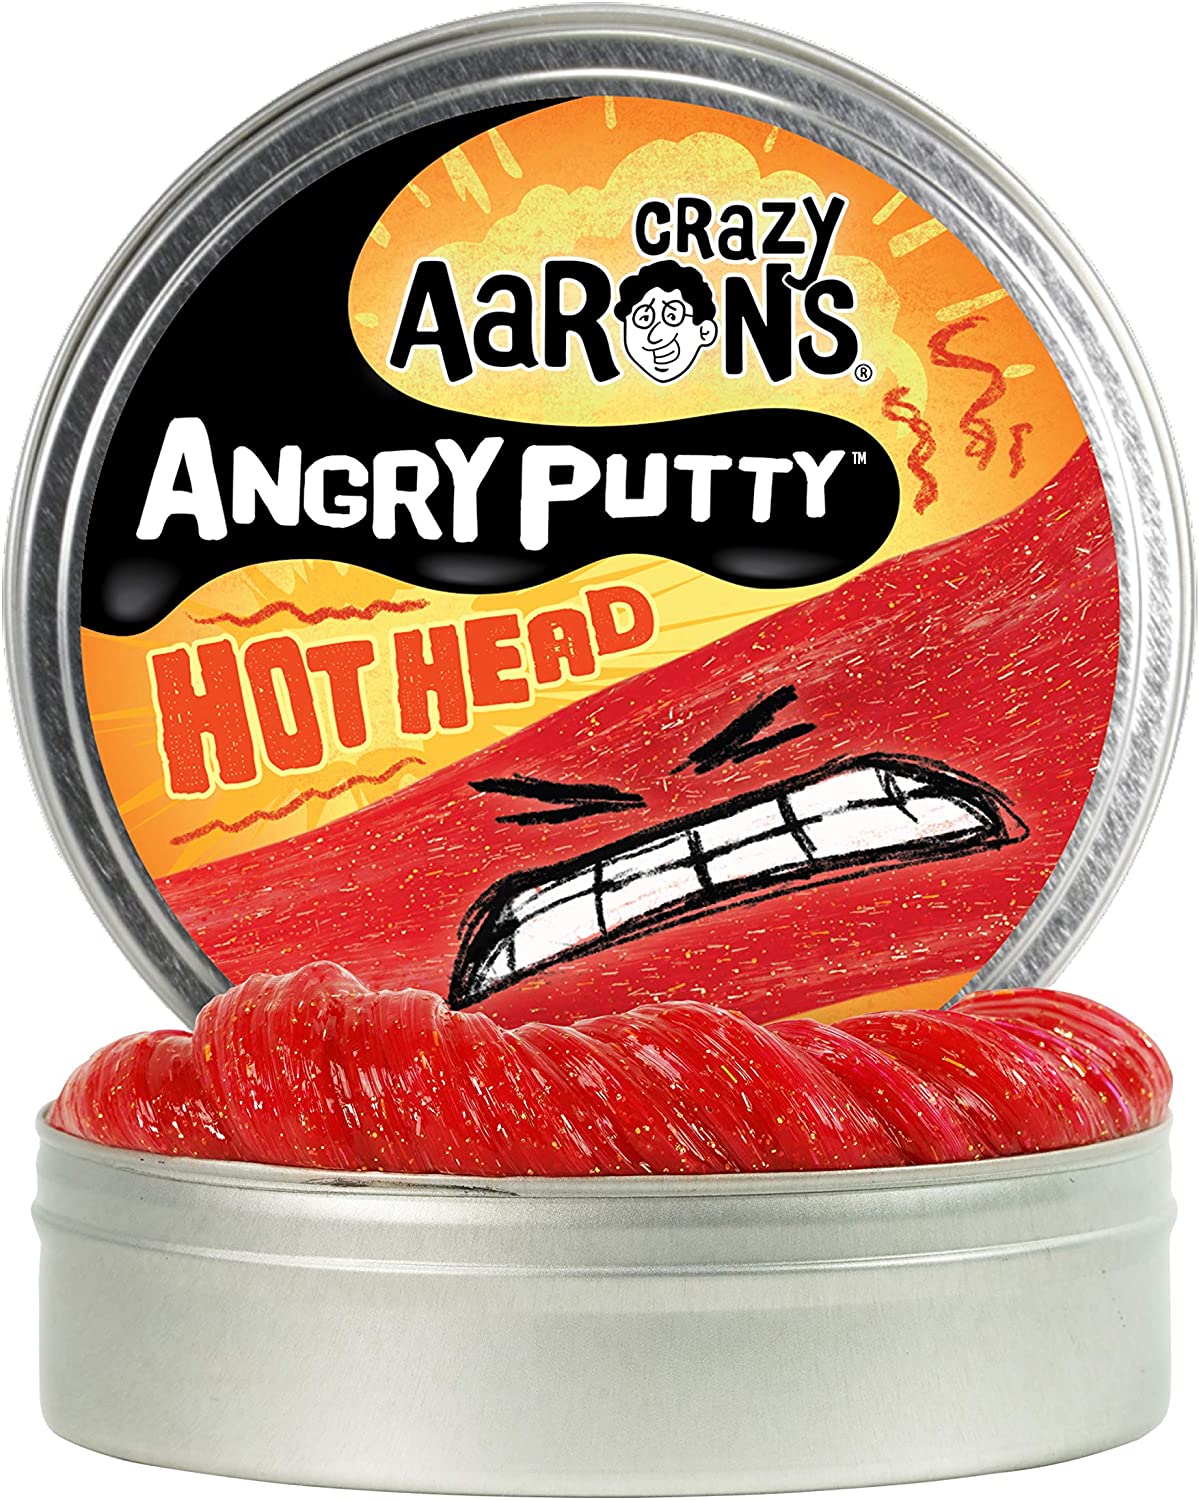 Crazy Aaron's 4" Angry Putty